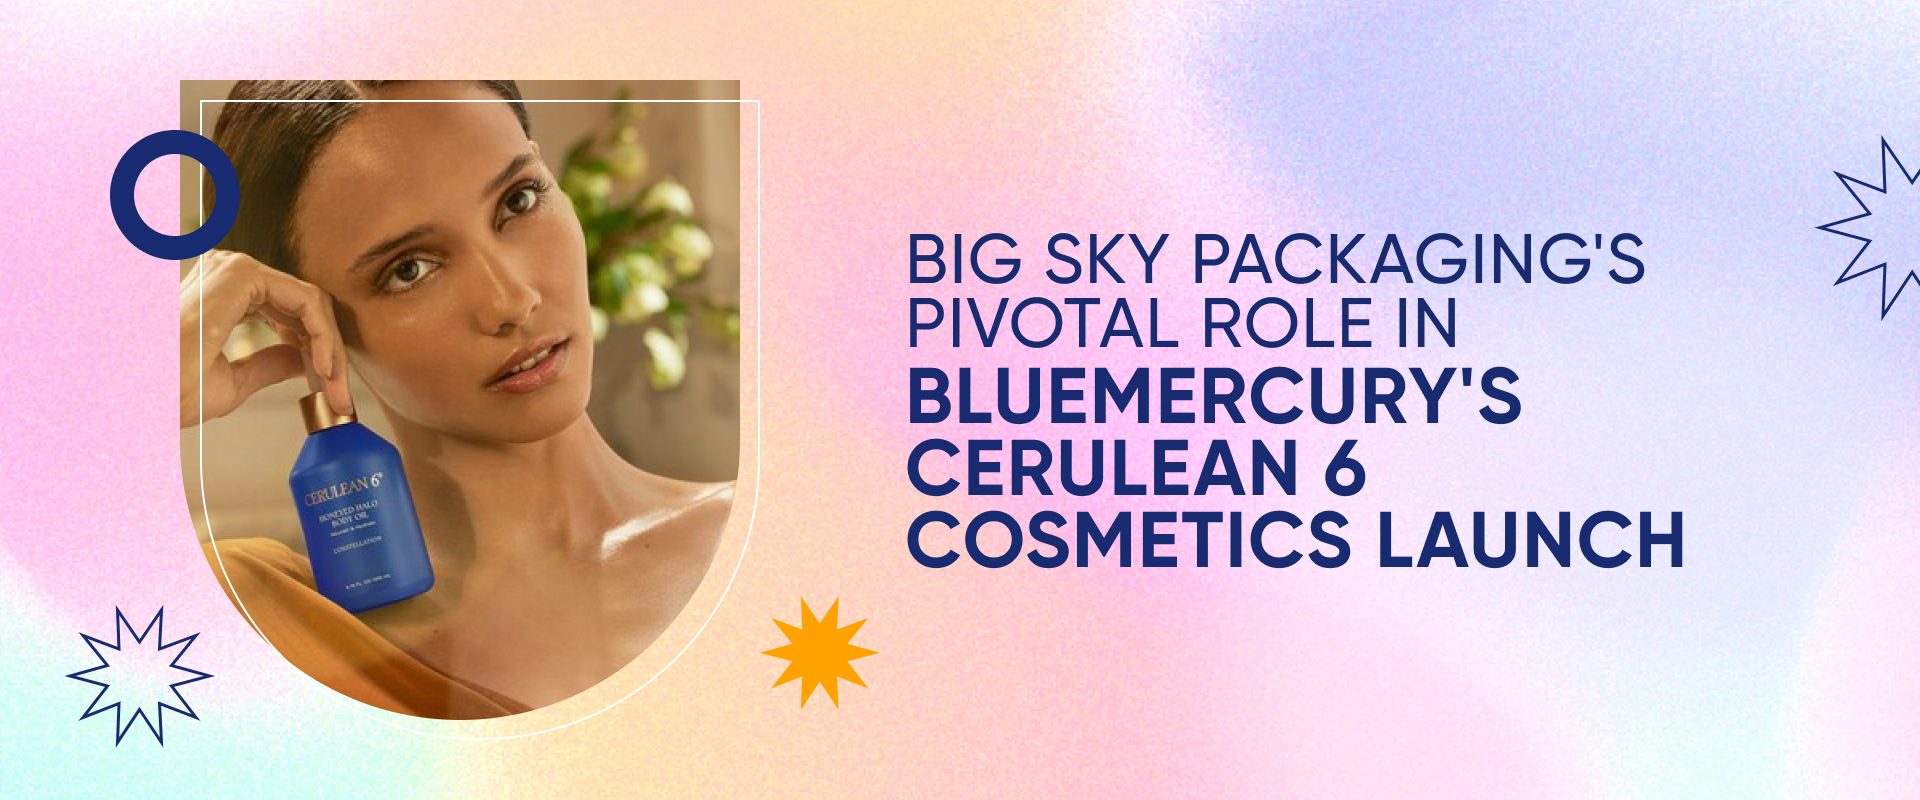 BIG SKY PACKAGING’s Pivotal Role in Bluemercury’s Cerulean 6 Cosmetics Launch